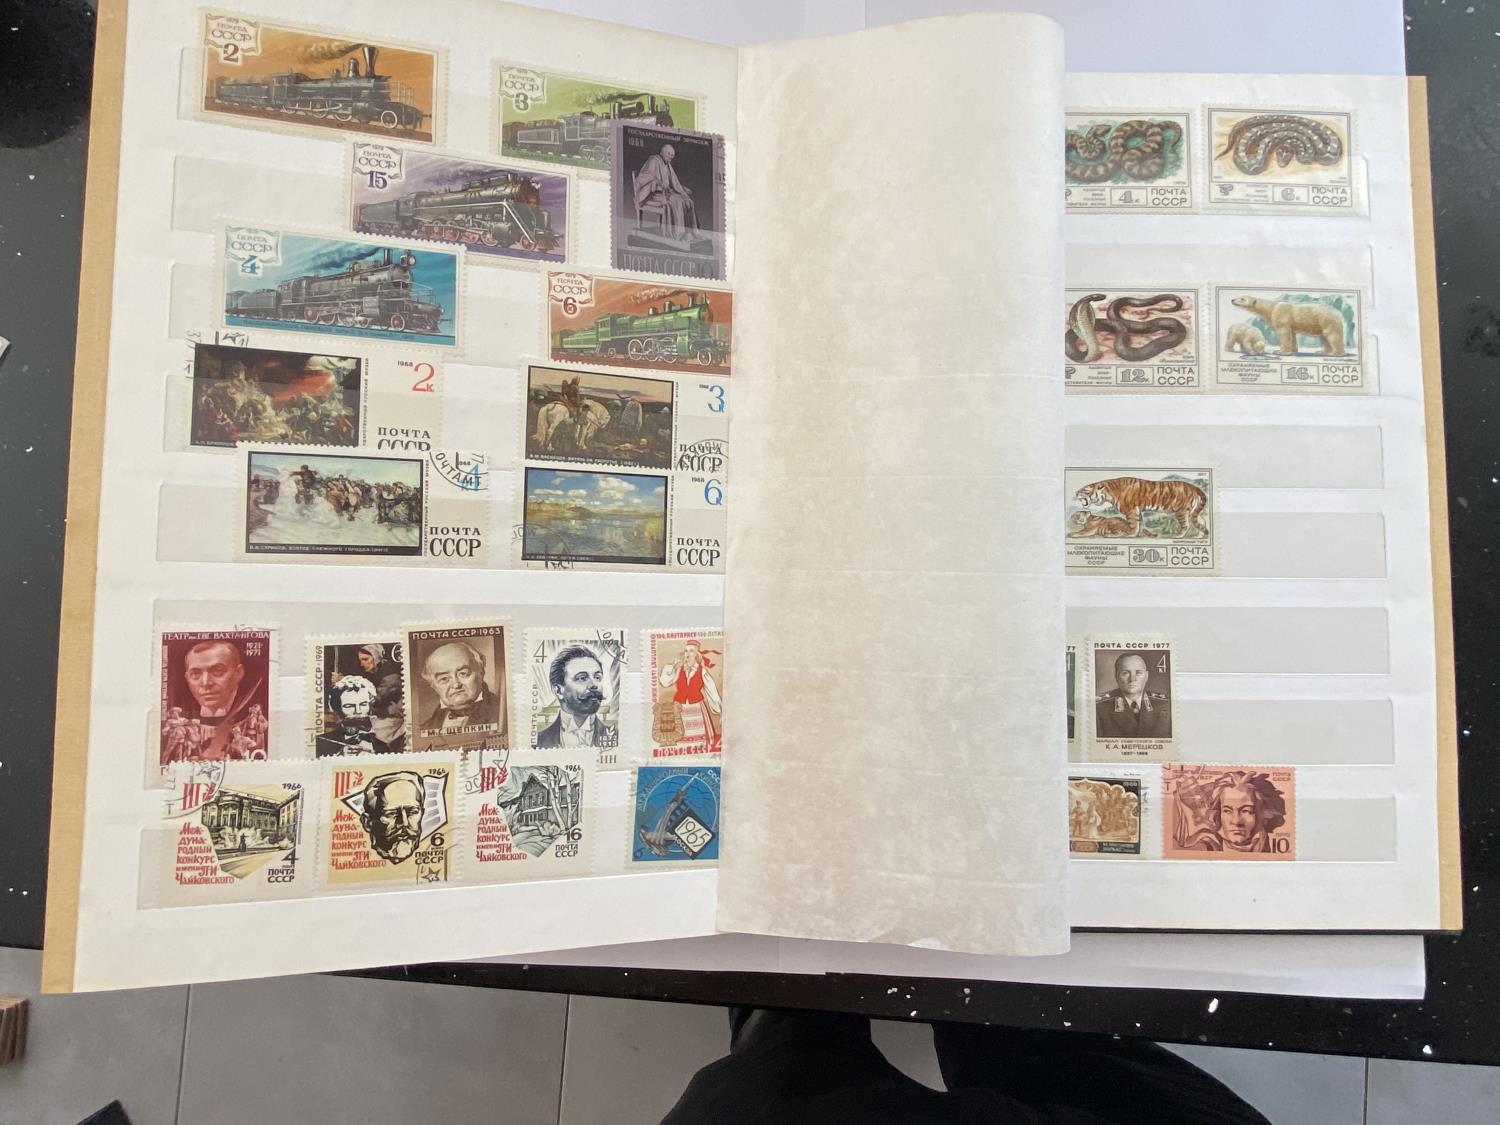 A STAMP ALBUM CONTAINING RUSSIAN STAMPS